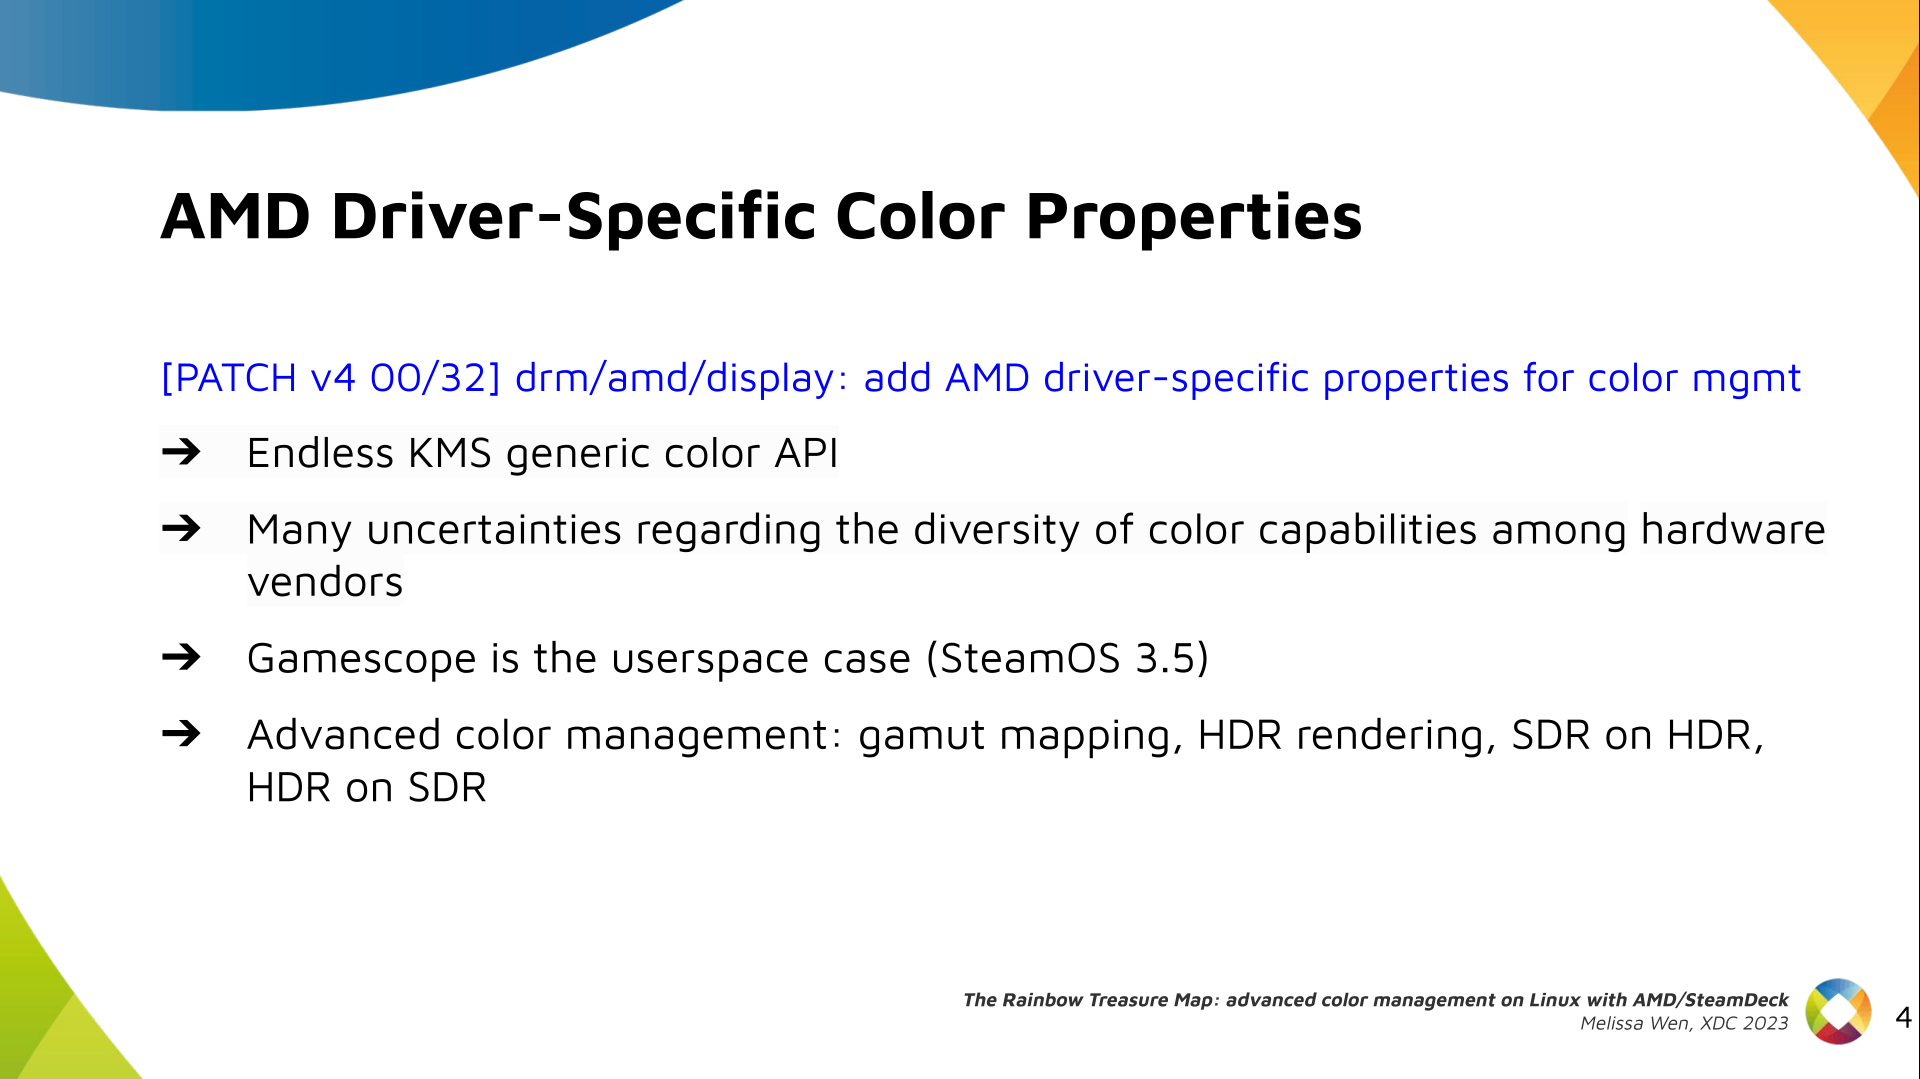 Slide 4: Describe our work on AMD driver-specific color properties